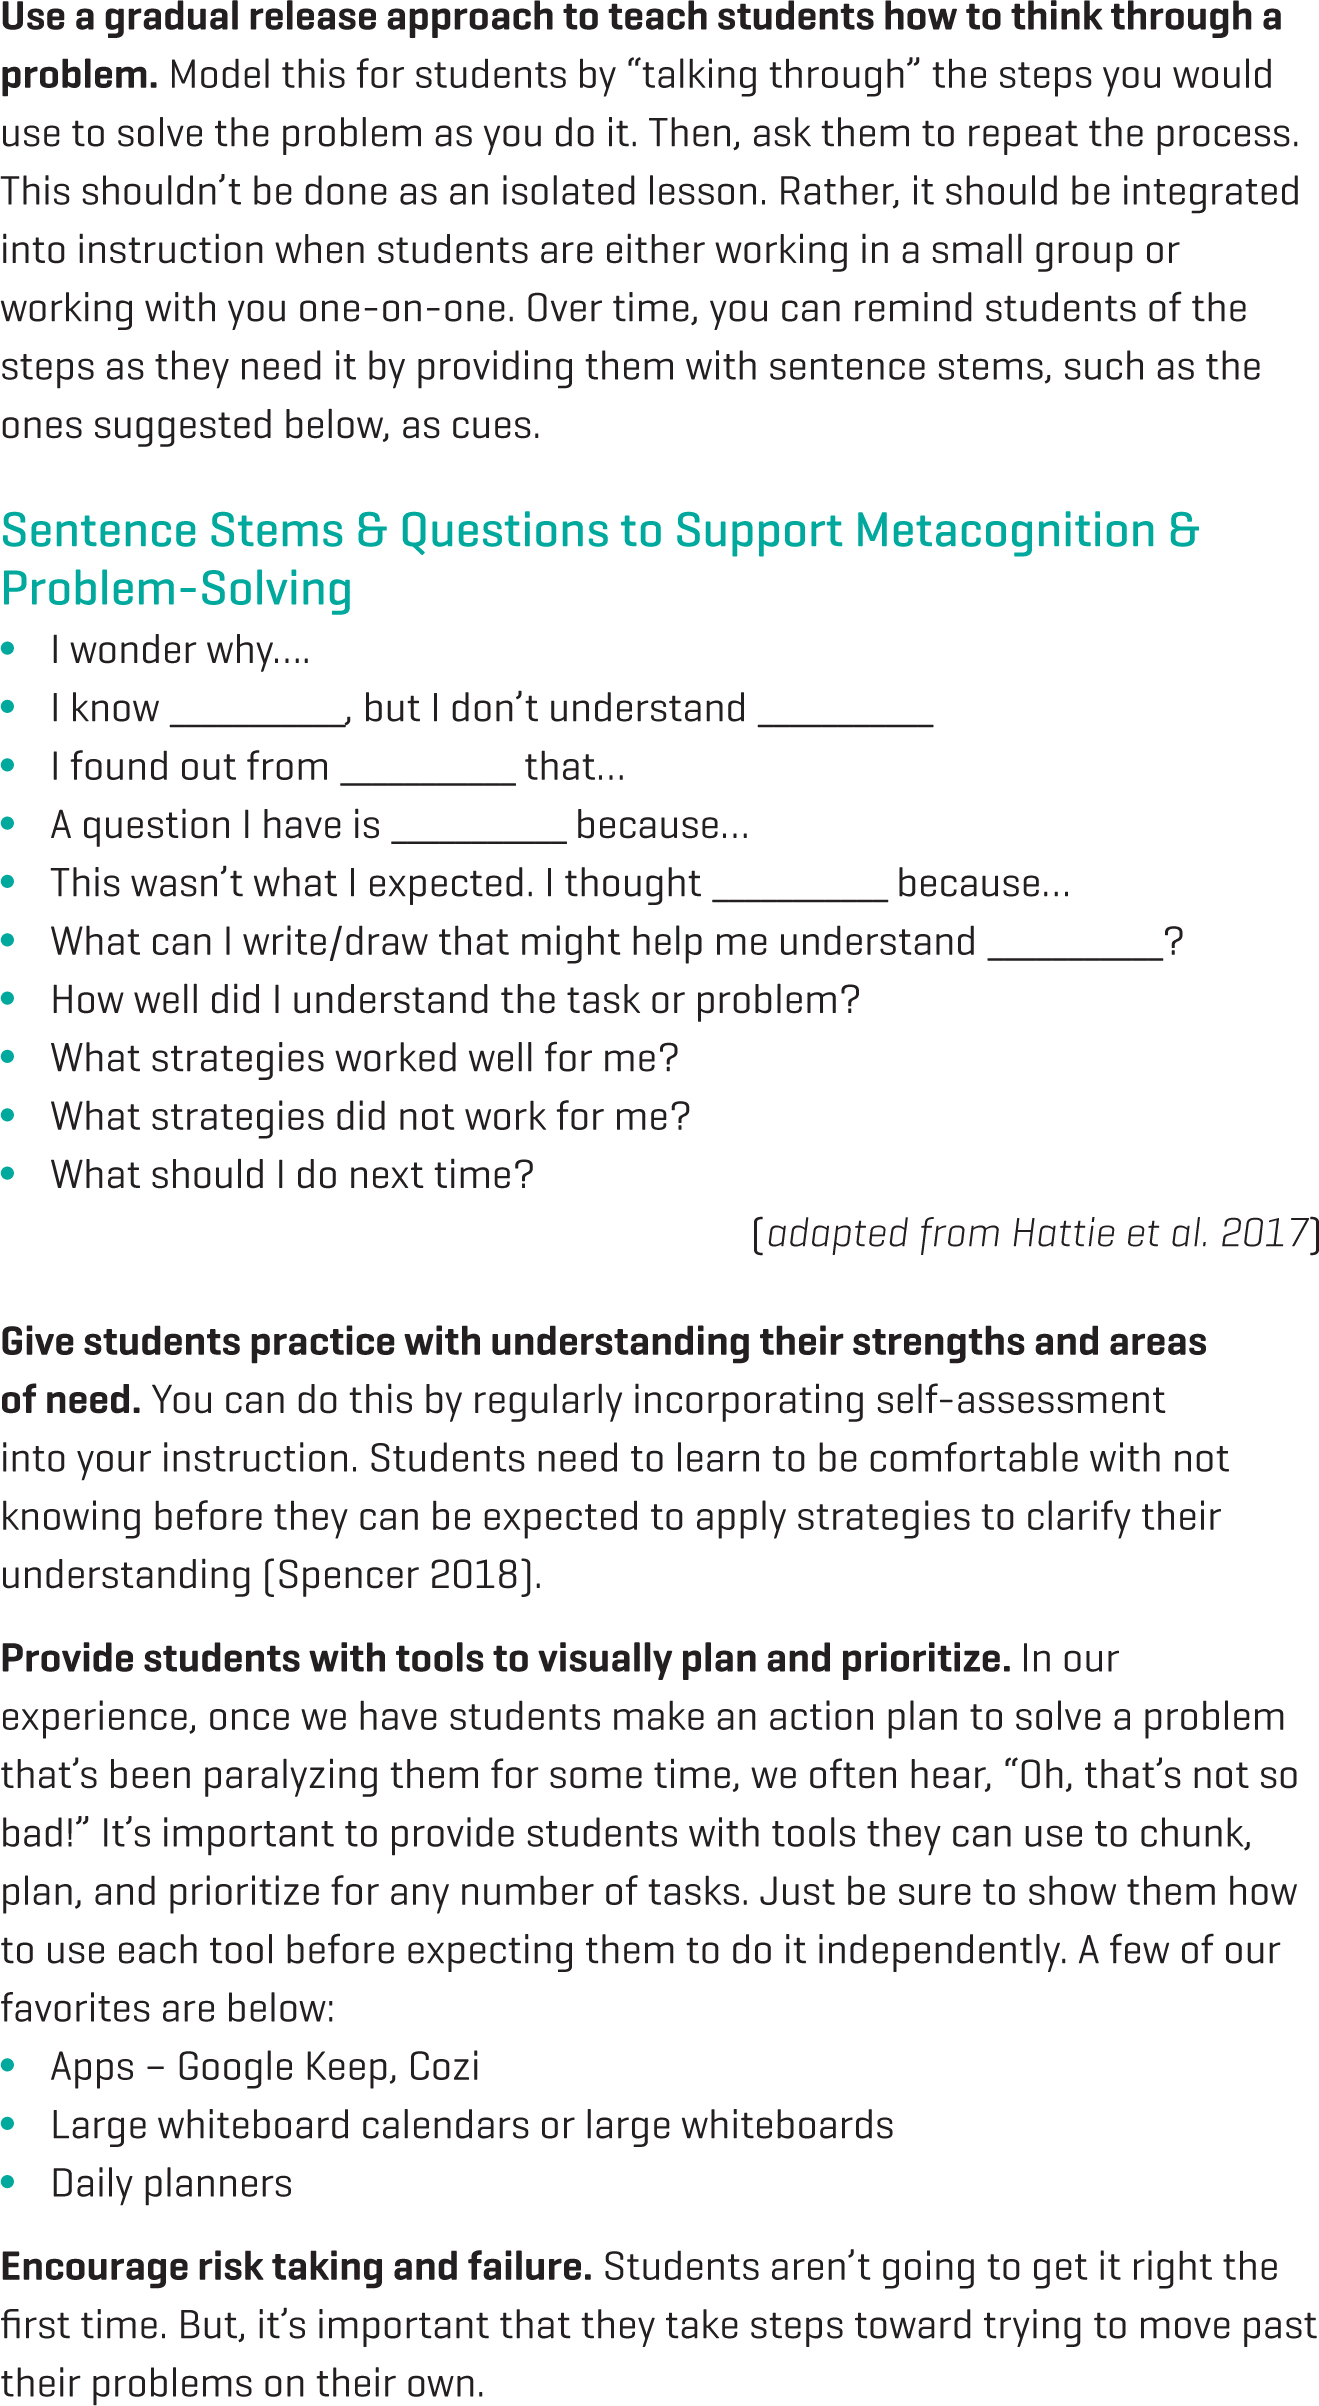 Approaches to support students in moving past problems